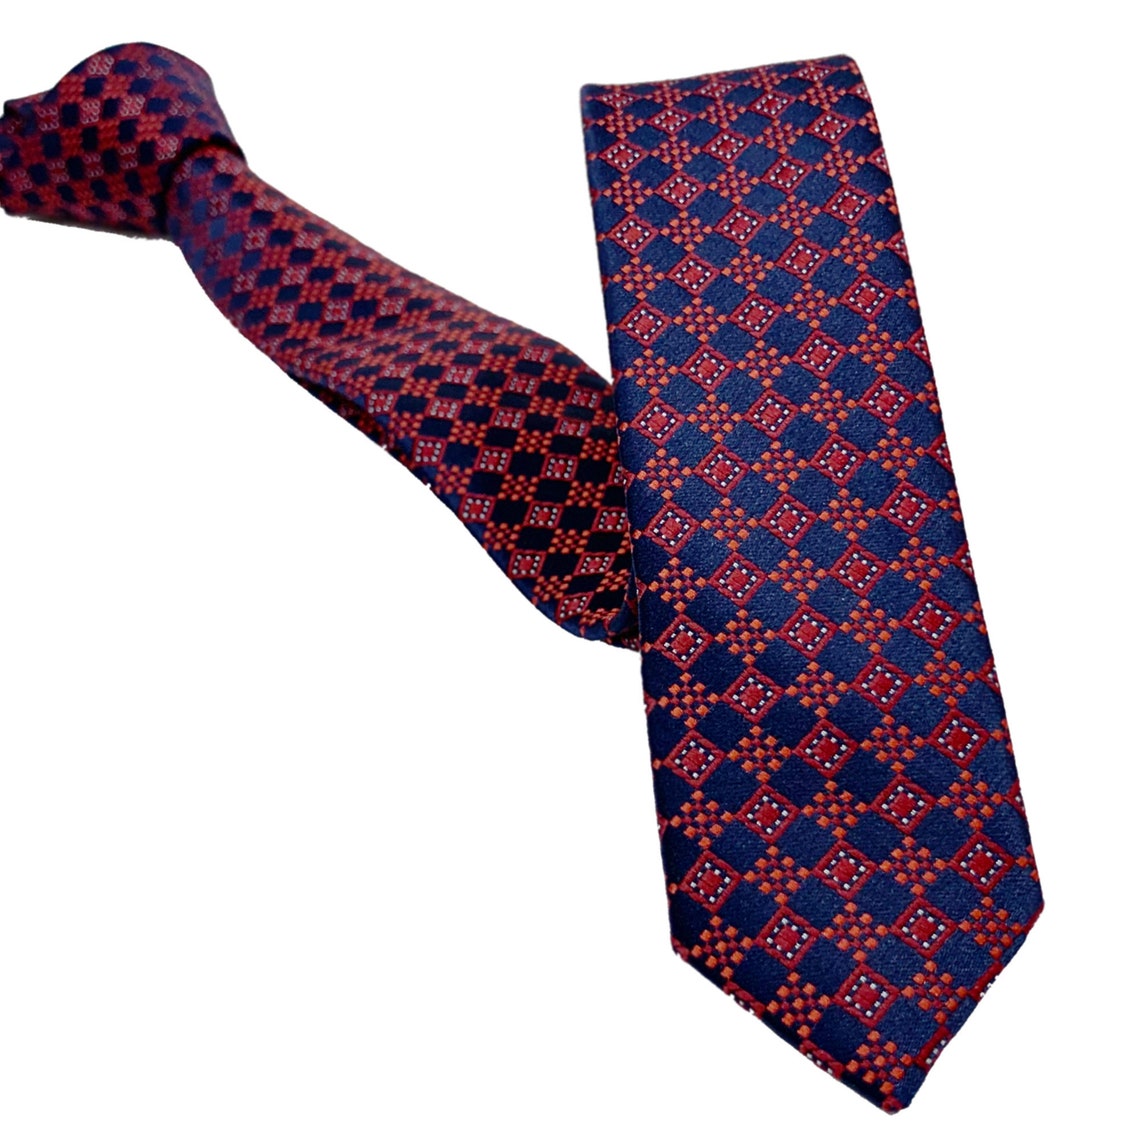 Extra Slim Dark Blue Red and White Small Plaid Tie 1.58 - Etsy